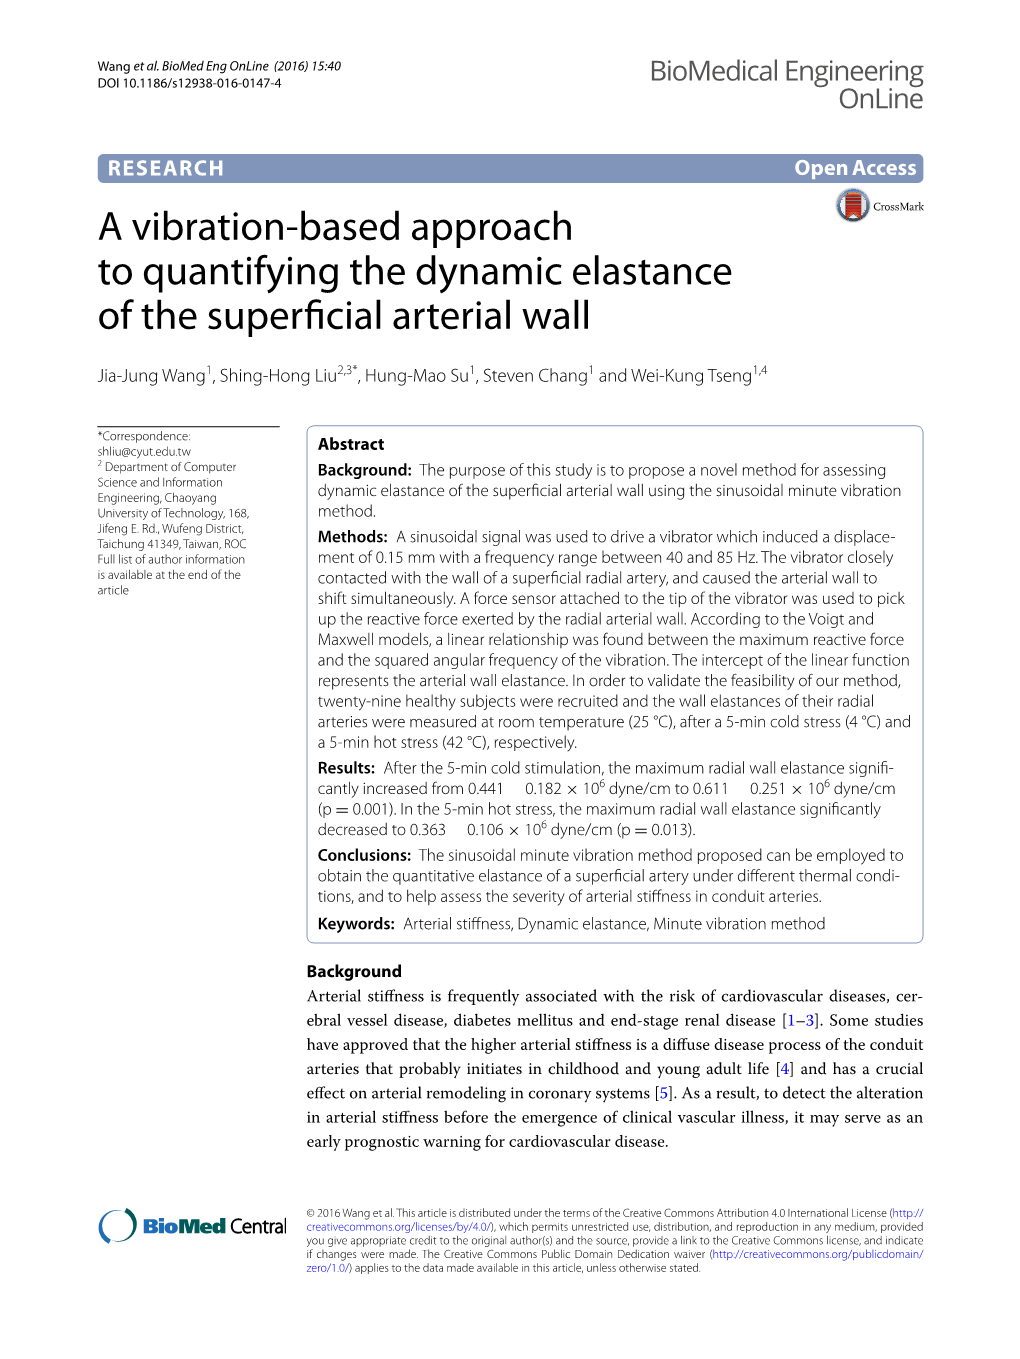 A Vibration-Based Approach to Quantifying the Dynamic Elastance of the Superficial Arterial Wall